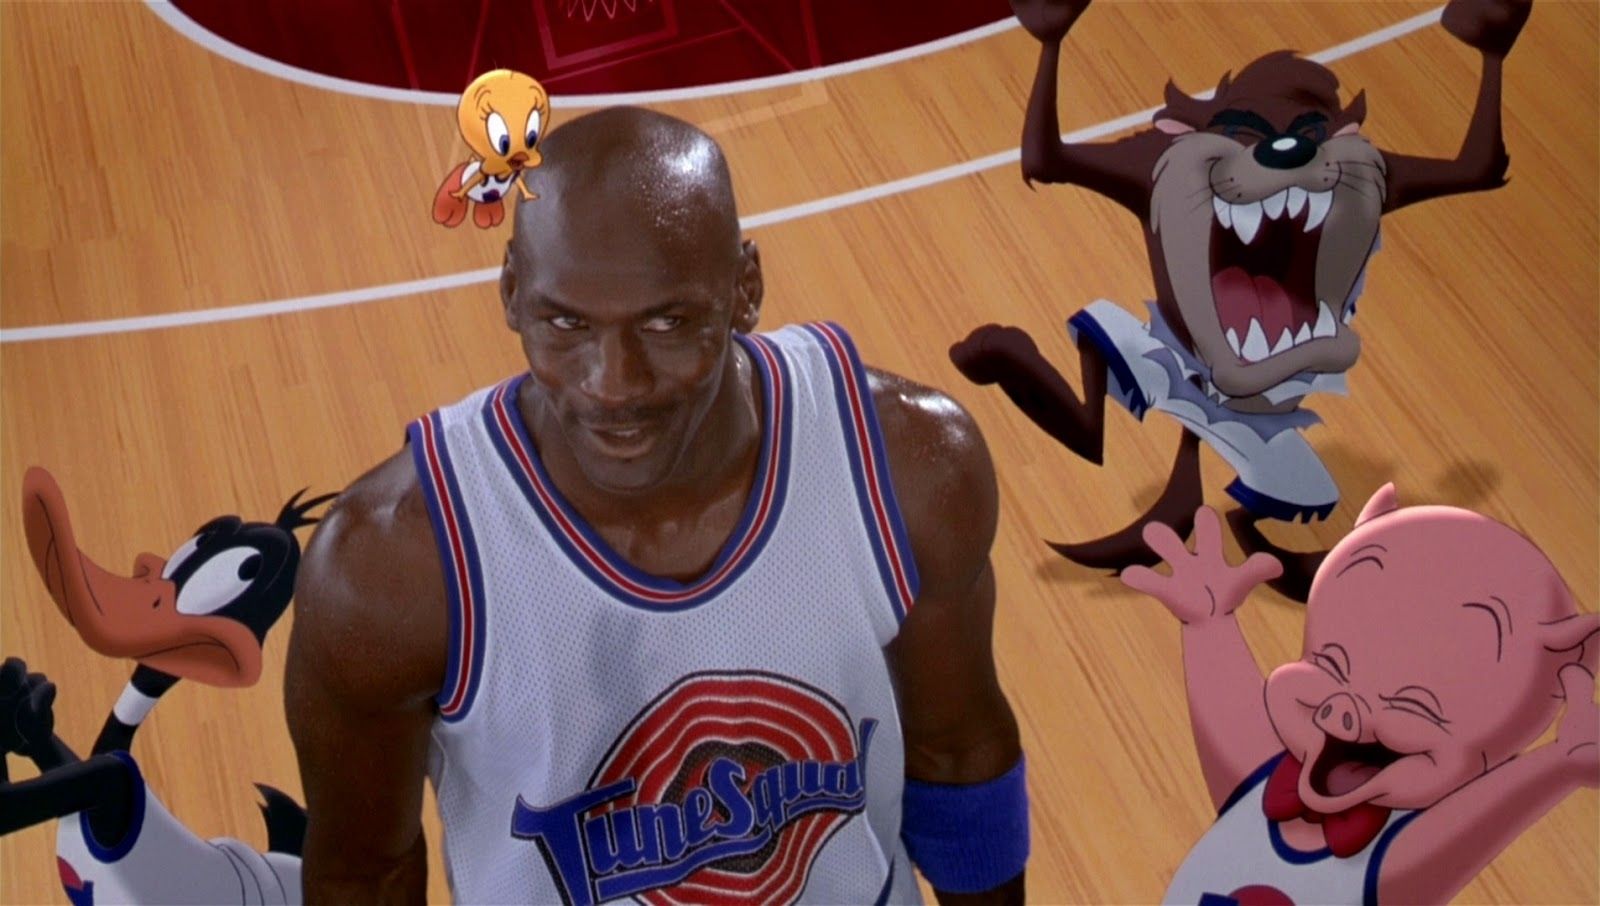 Space Jam 2 is coming - New Sport Side